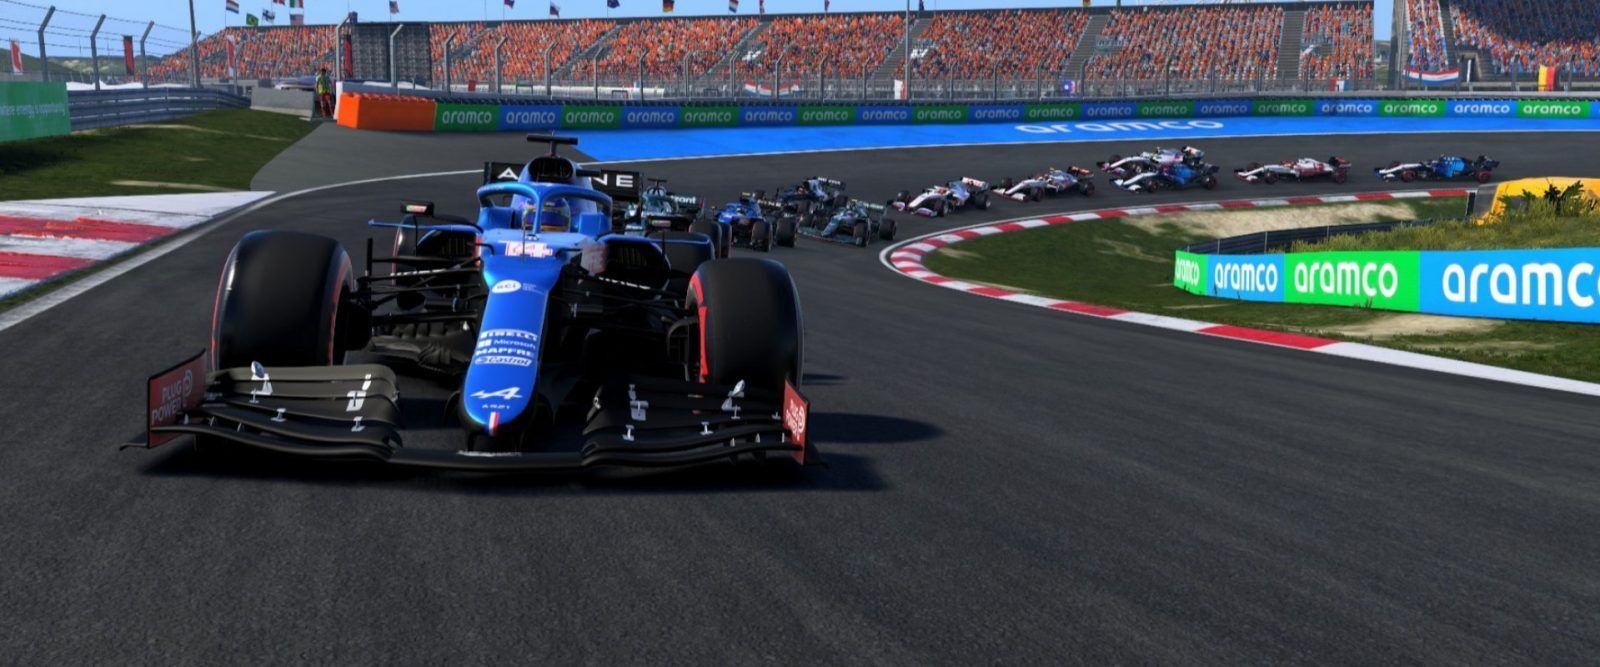 Get the Most out of F1 2021's Multiplayer Career Mode